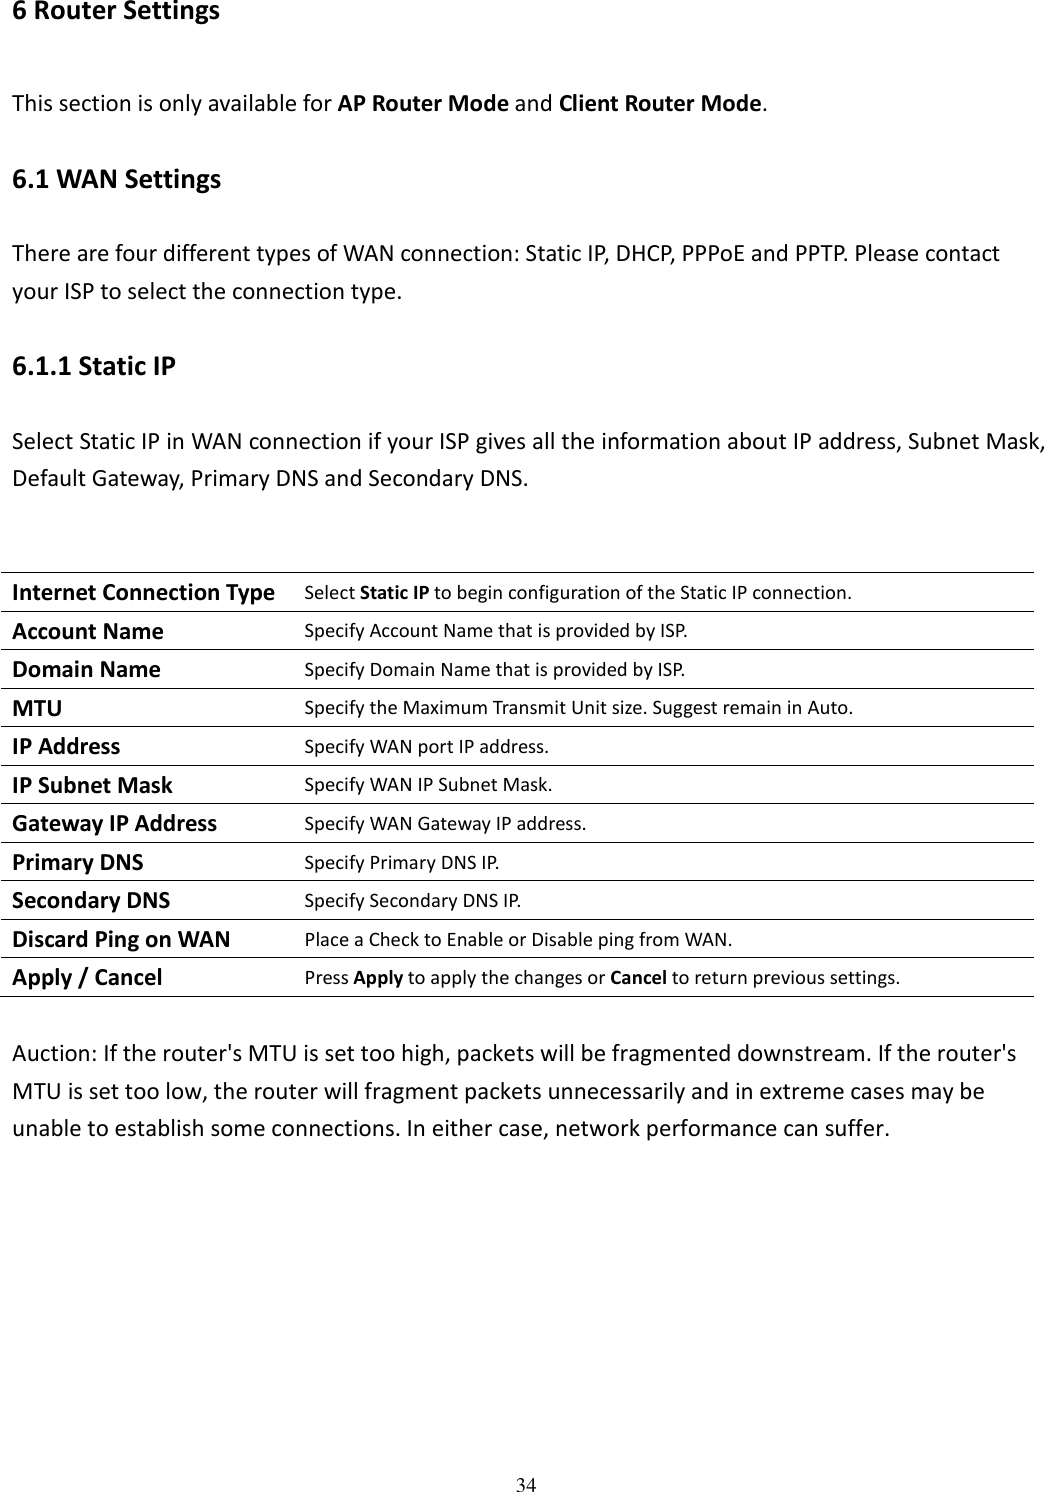   346 Router Settings This section is only available for AP Router Mode and Client Router Mode. 6.1 WAN Settings There are four different types of WAN connection: Static IP, DHCP, PPPoE and PPTP. Please contact your ISP to select the connection type. 6.1.1 Static IP Select Static IP in WAN connection if your ISP gives all the information about IP address, Subnet Mask, Default Gateway, Primary DNS and Secondary DNS.   Internet Connection Type Select Static IP to begin configuration of the Static IP connection. Account Name Specify Account Name that is provided by ISP. Domain Name Specify Domain Name that is provided by ISP. MTU Specify the Maximum Transmit Unit size. Suggest remain in Auto. IP Address Specify WAN port IP address. IP Subnet Mask Specify WAN IP Subnet Mask. Gateway IP Address Specify WAN Gateway IP address. Primary DNS Specify Primary DNS IP. Secondary DNS Specify Secondary DNS IP. Discard Ping on WAN Place a Check to Enable or Disable ping from WAN. Apply / Cancel Press Apply to apply the changes or Cancel to return previous settings.  Auction: If the router&apos;s MTU is set too high, packets will be fragmented downstream. If the router&apos;s MTU is set too low, the router will fragment packets unnecessarily and in extreme cases may be unable to establish some connections. In either case, network performance can suffer.       